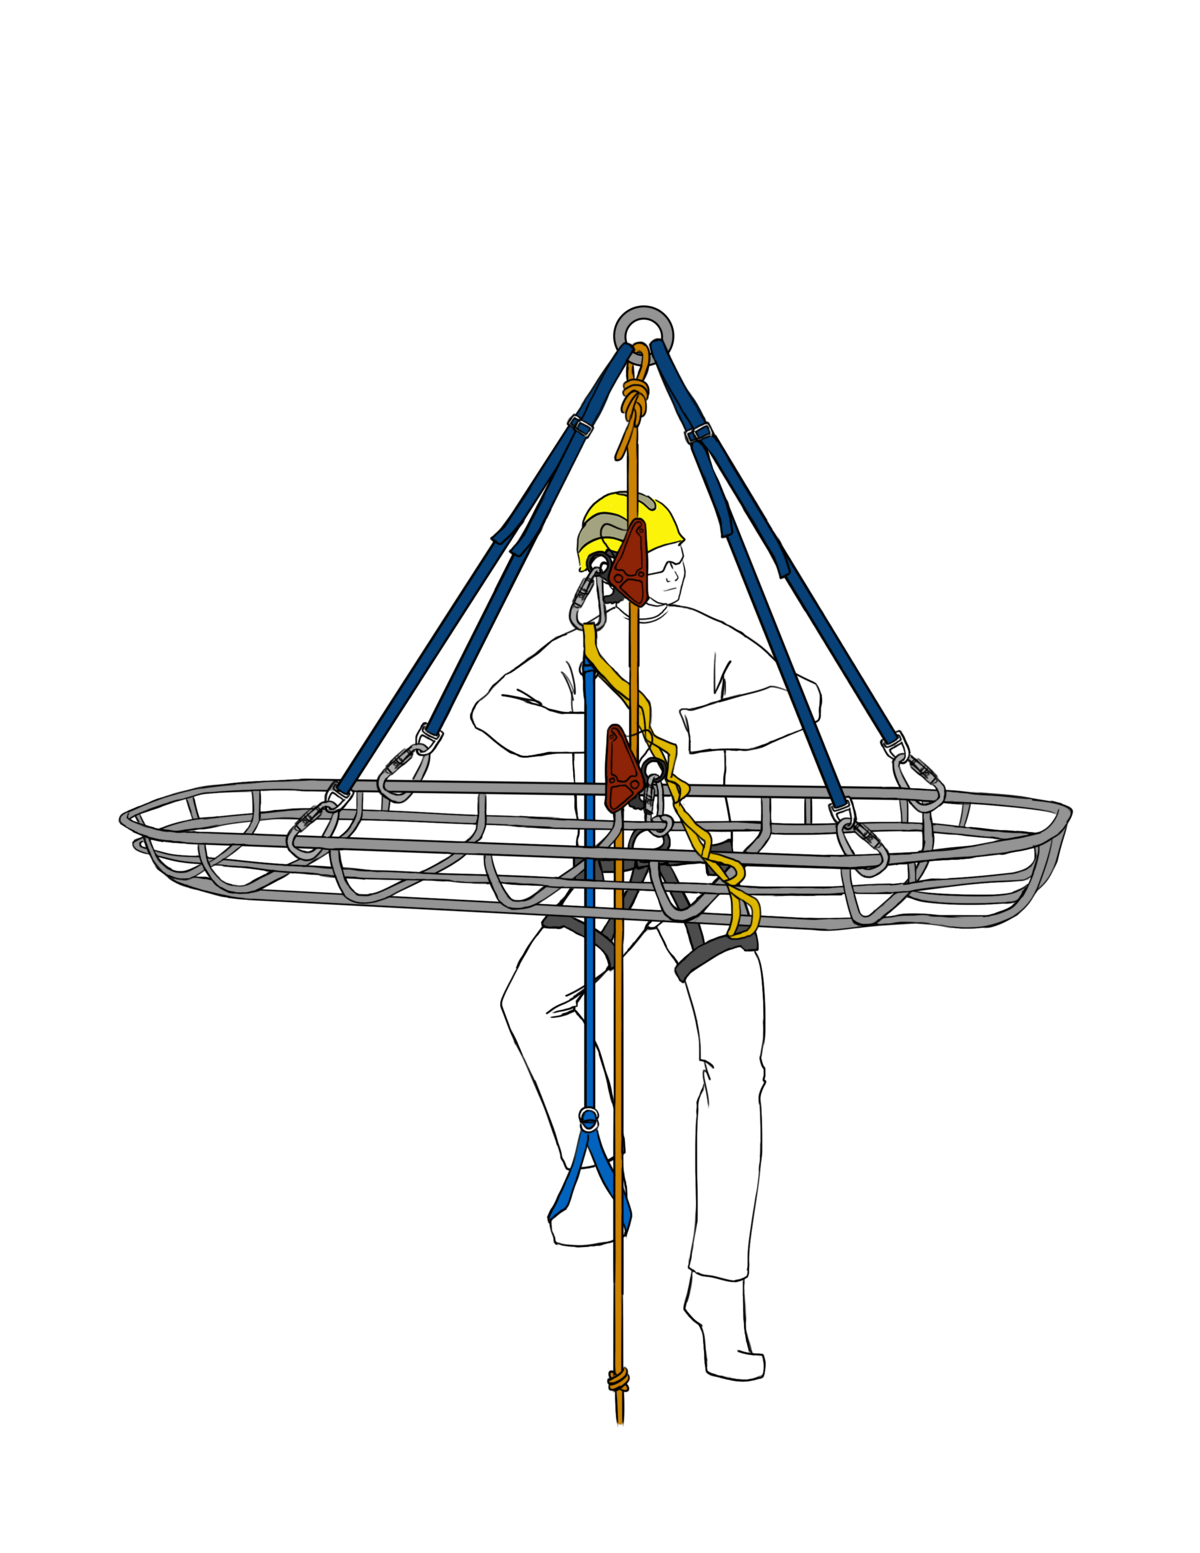 10 Rope Rescue Equipment Categories Used in Advanced Rope Rescue